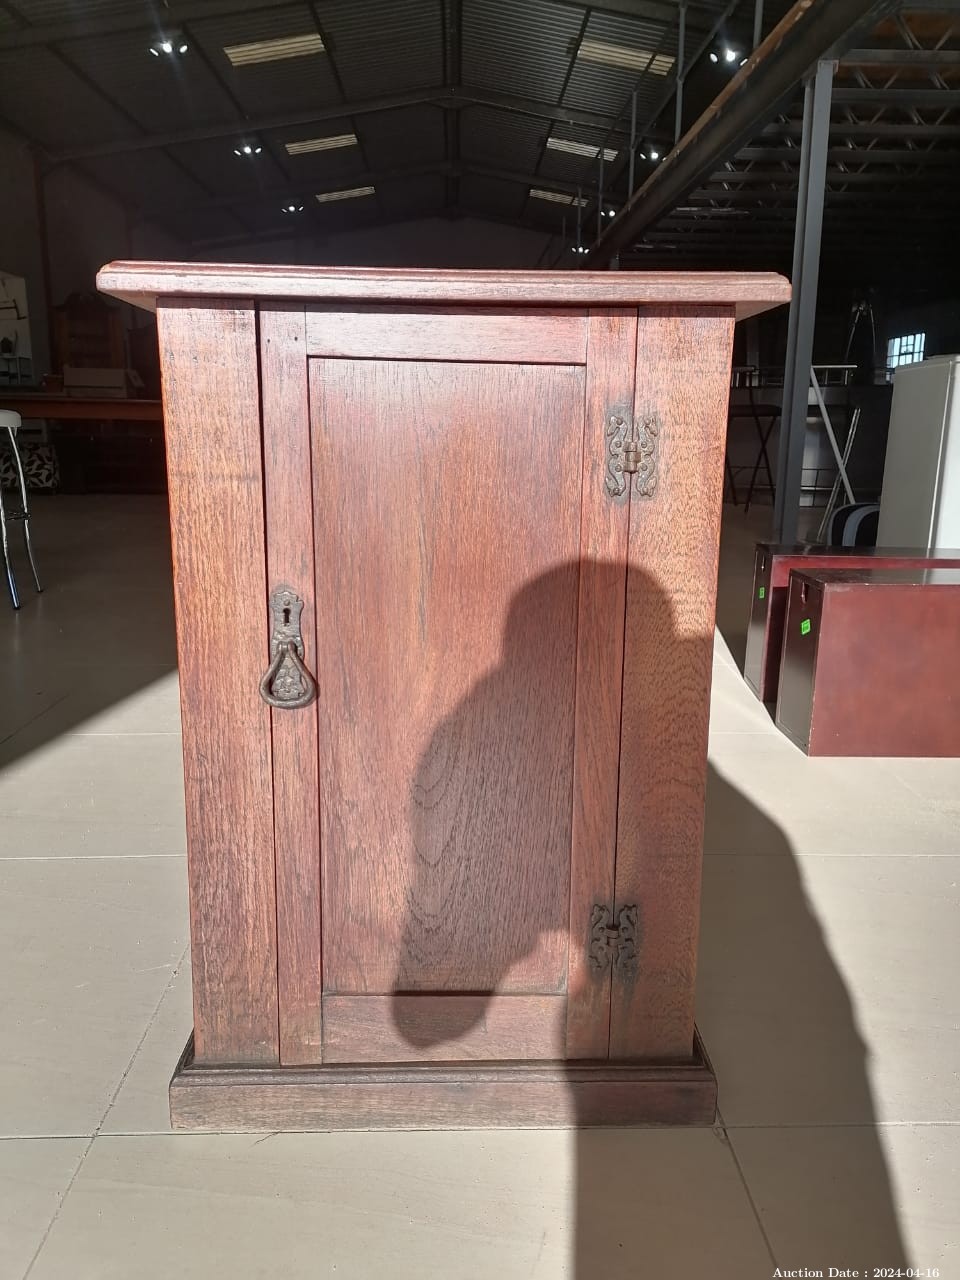 Lot 6614 - 1x Solid Wood Cabinet